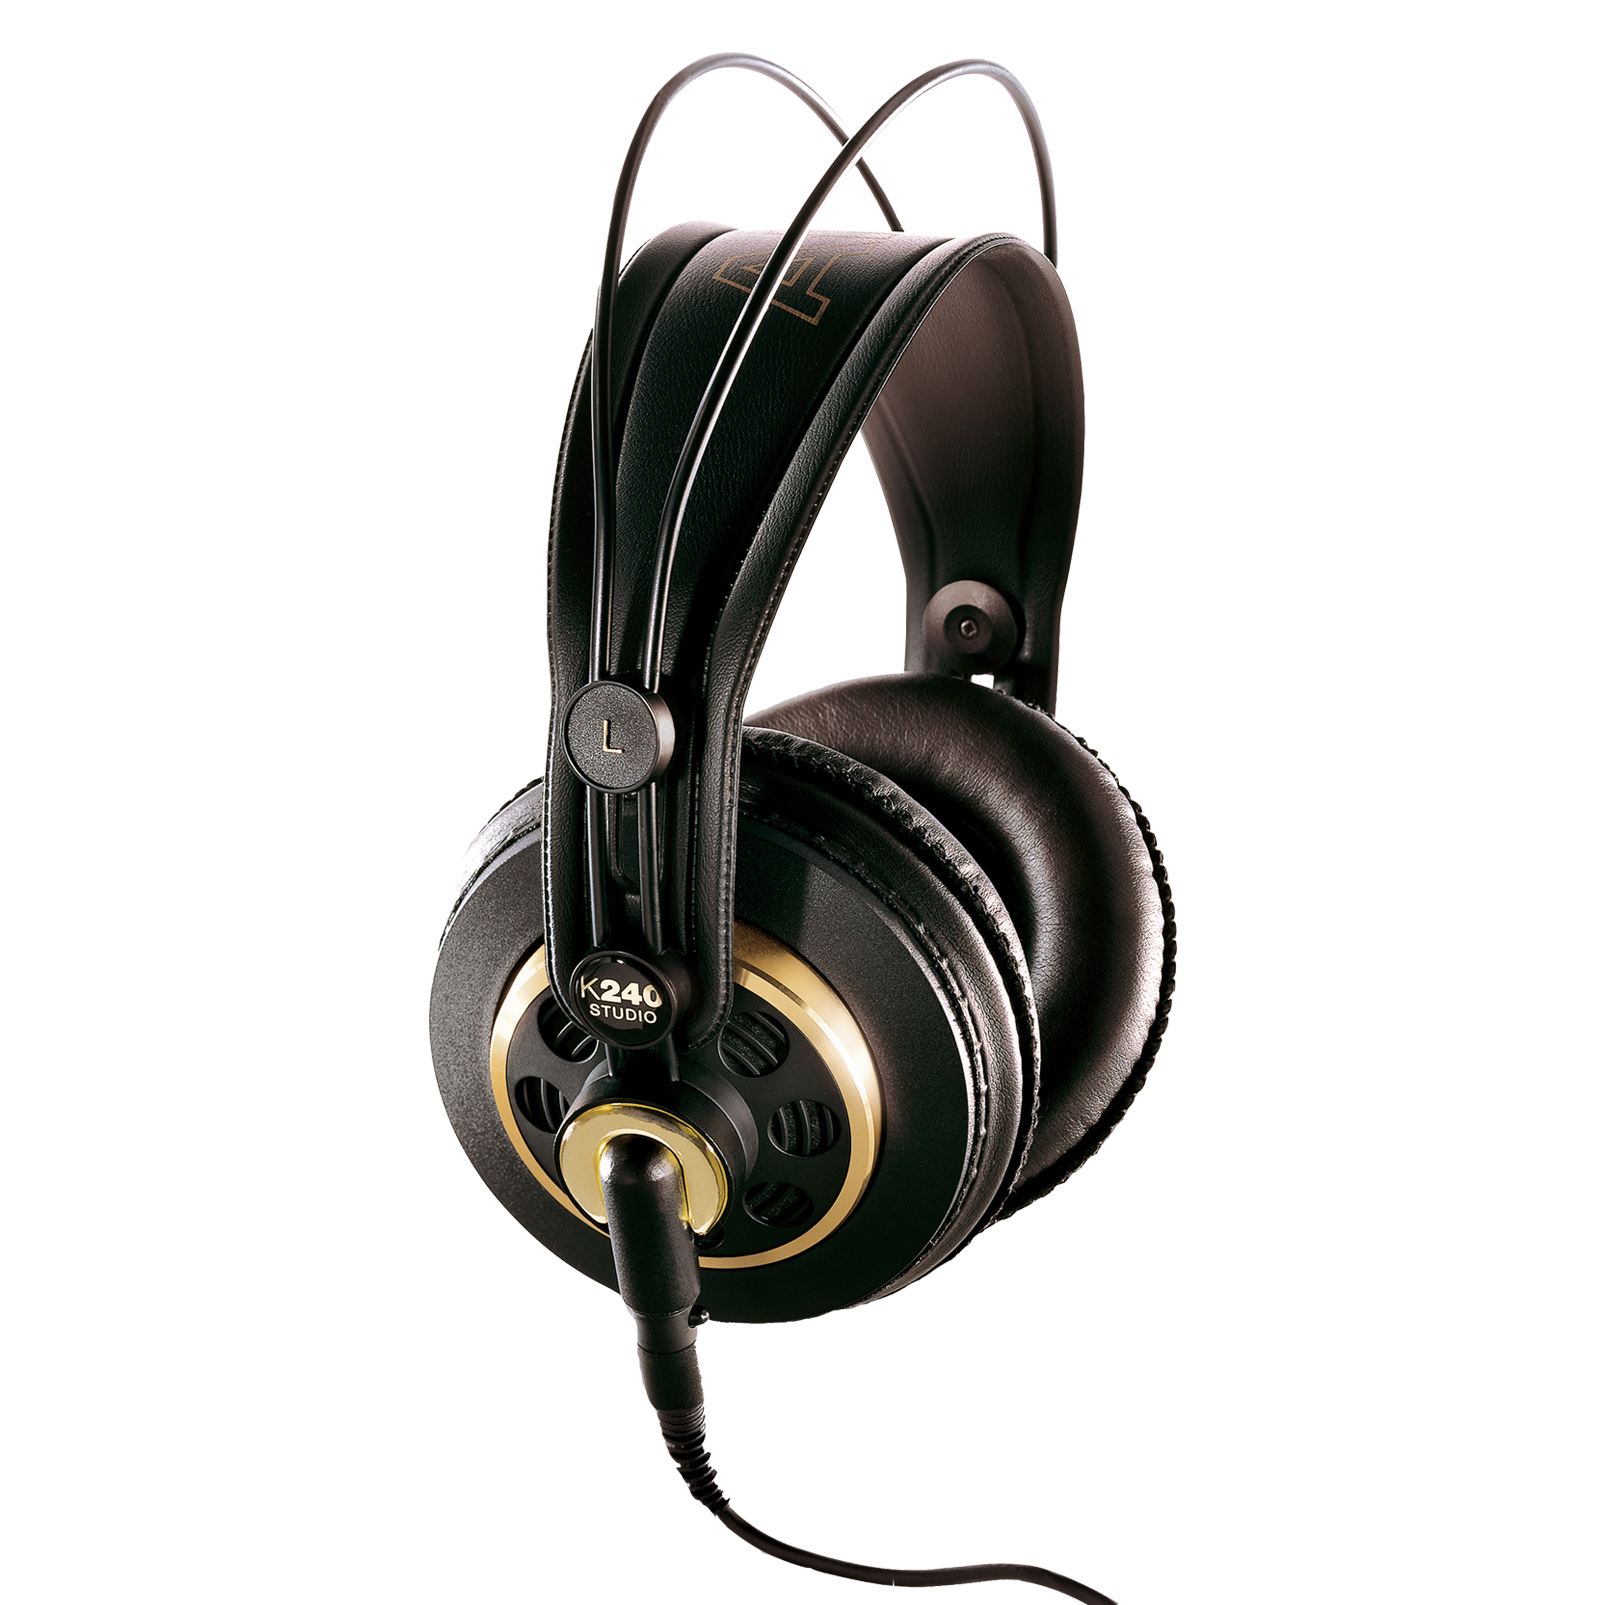 AKG Father's Day Gift Guide | K240 Studio Sale $54.00